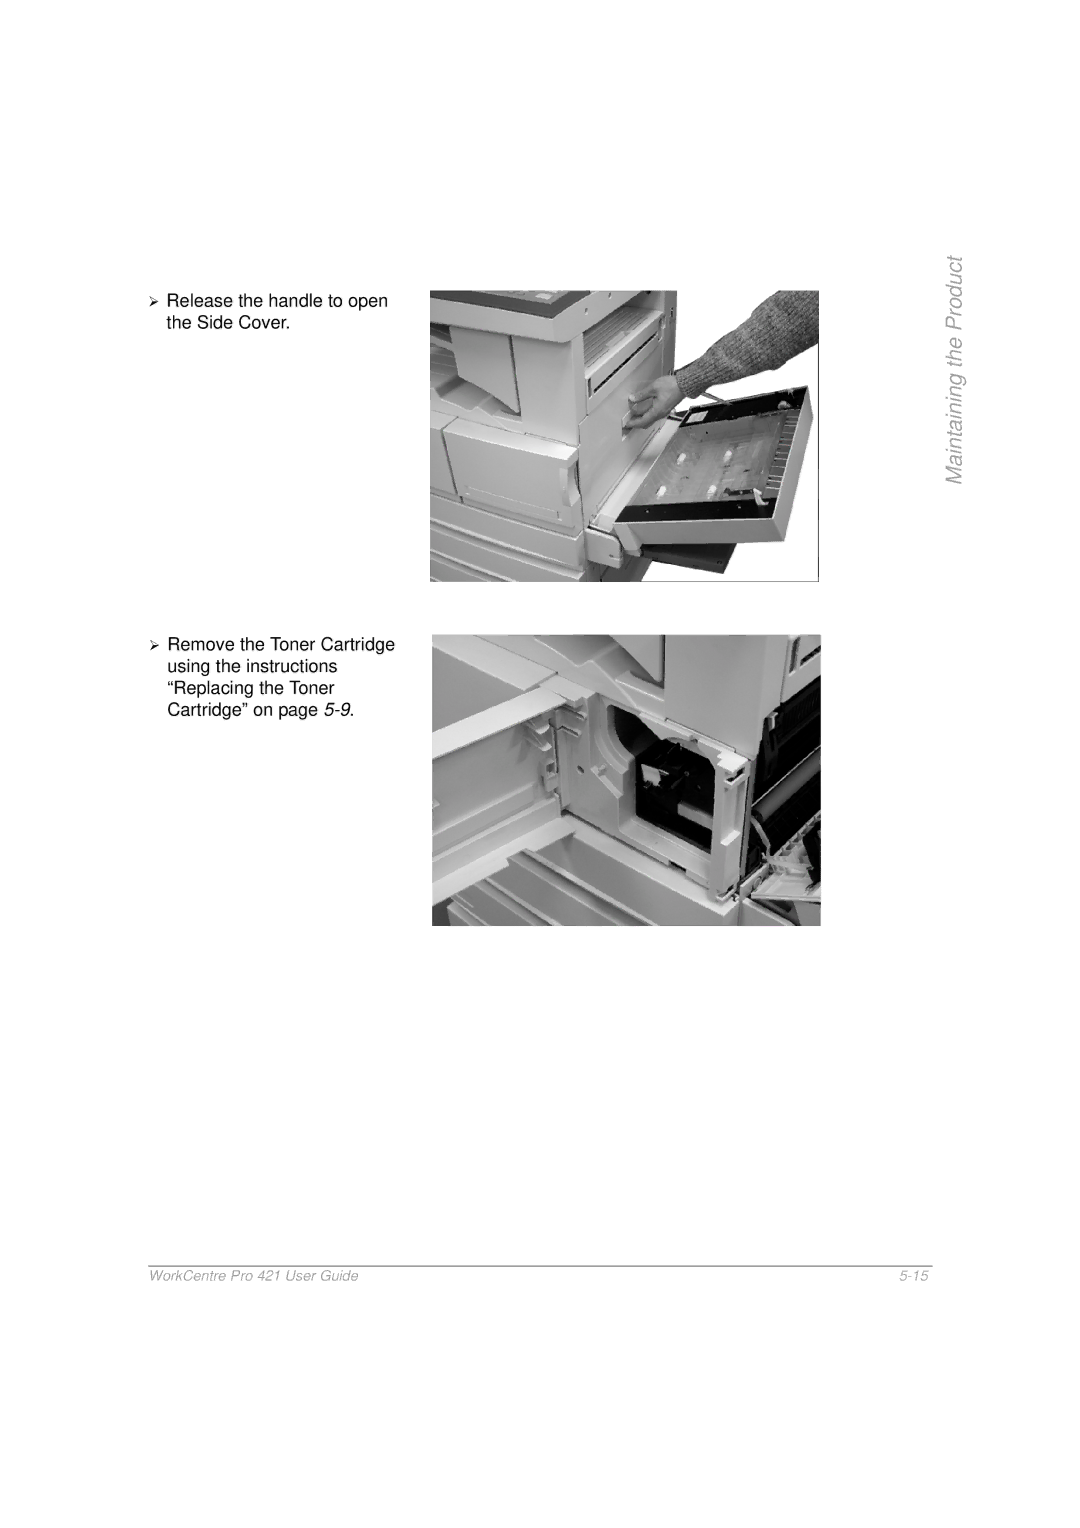 Xerox 421 manual Maintaining the Product 